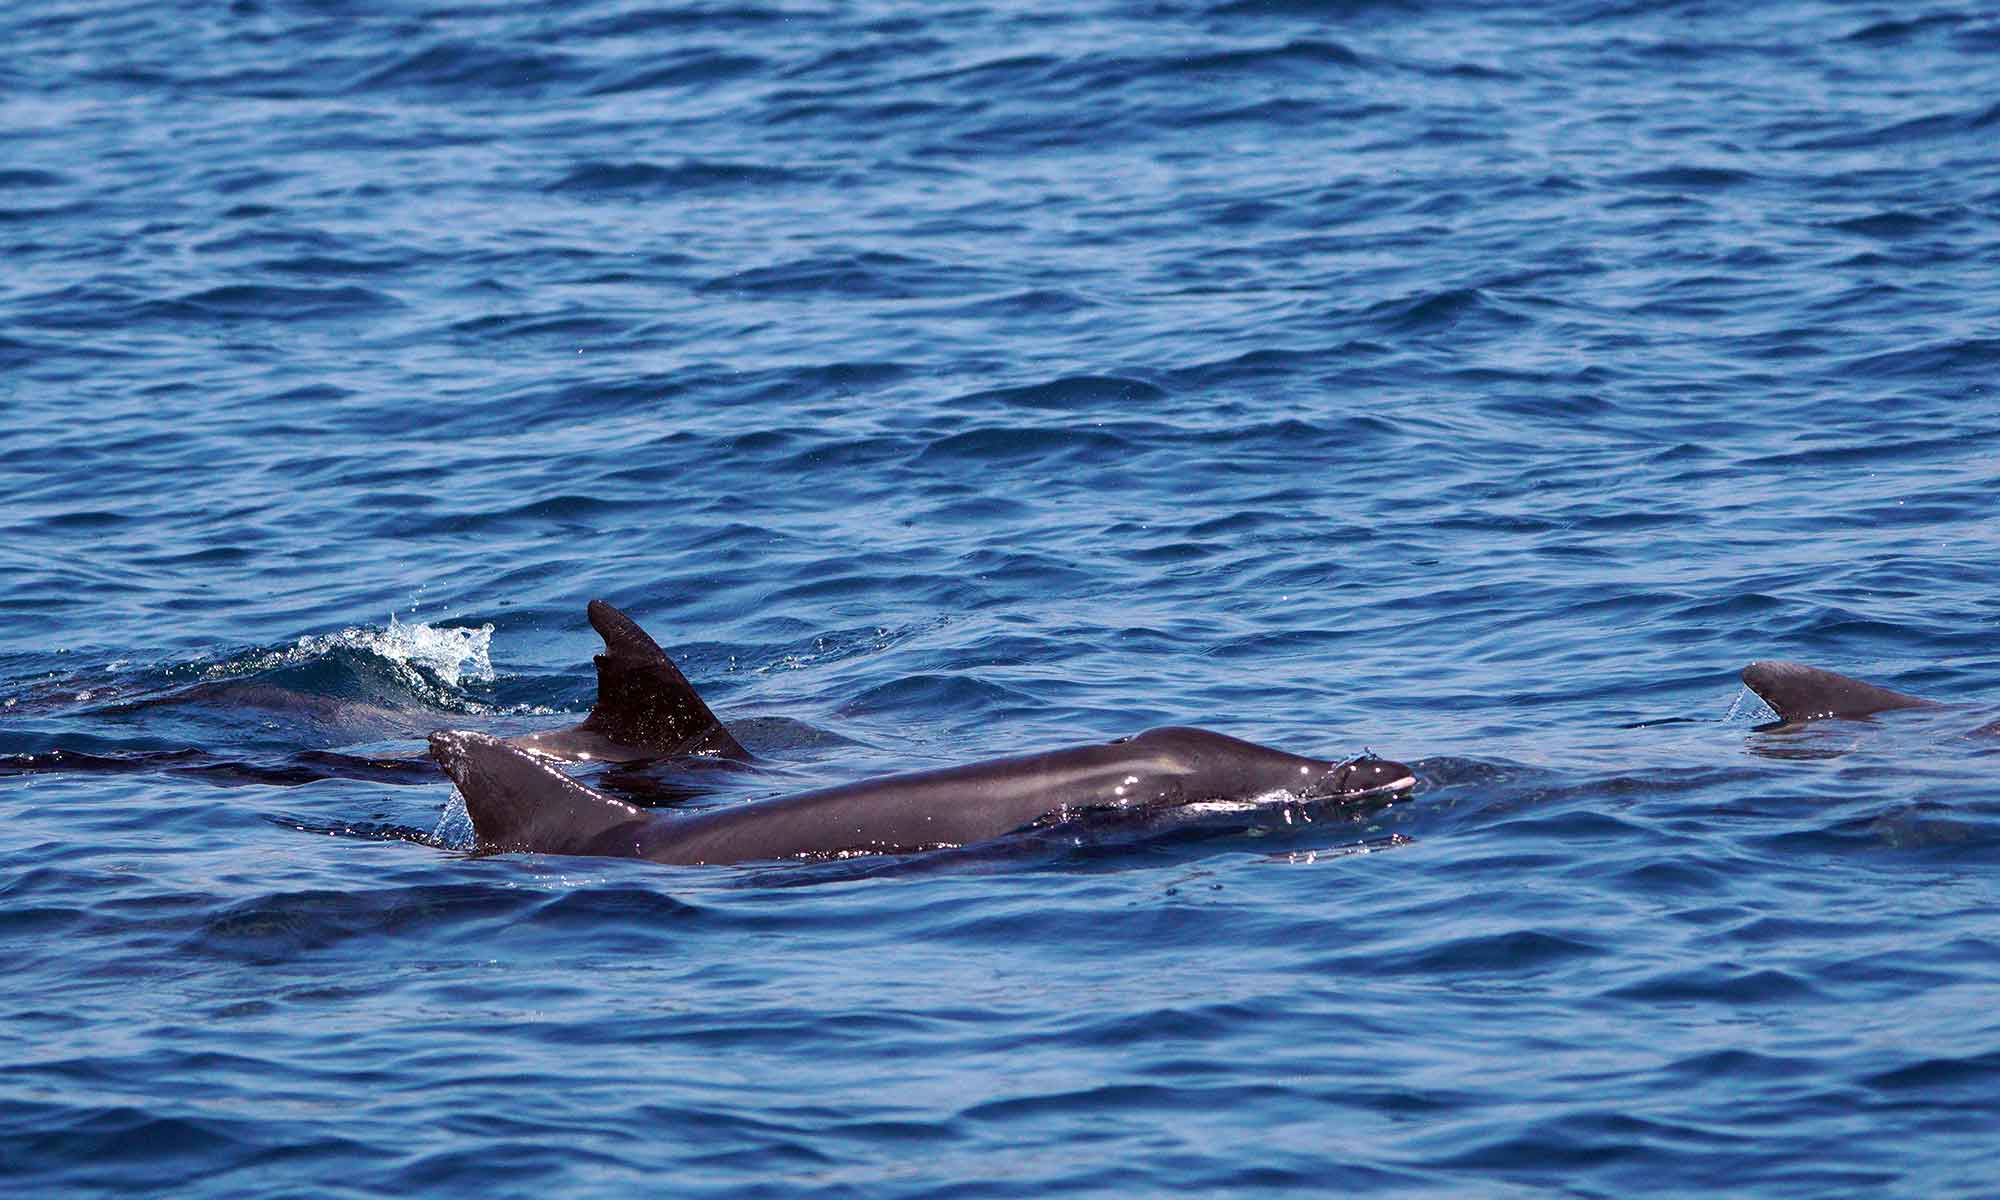 Rough-toothed dolphins are a summer season visitor to Madeira, when the ocean is warmer.